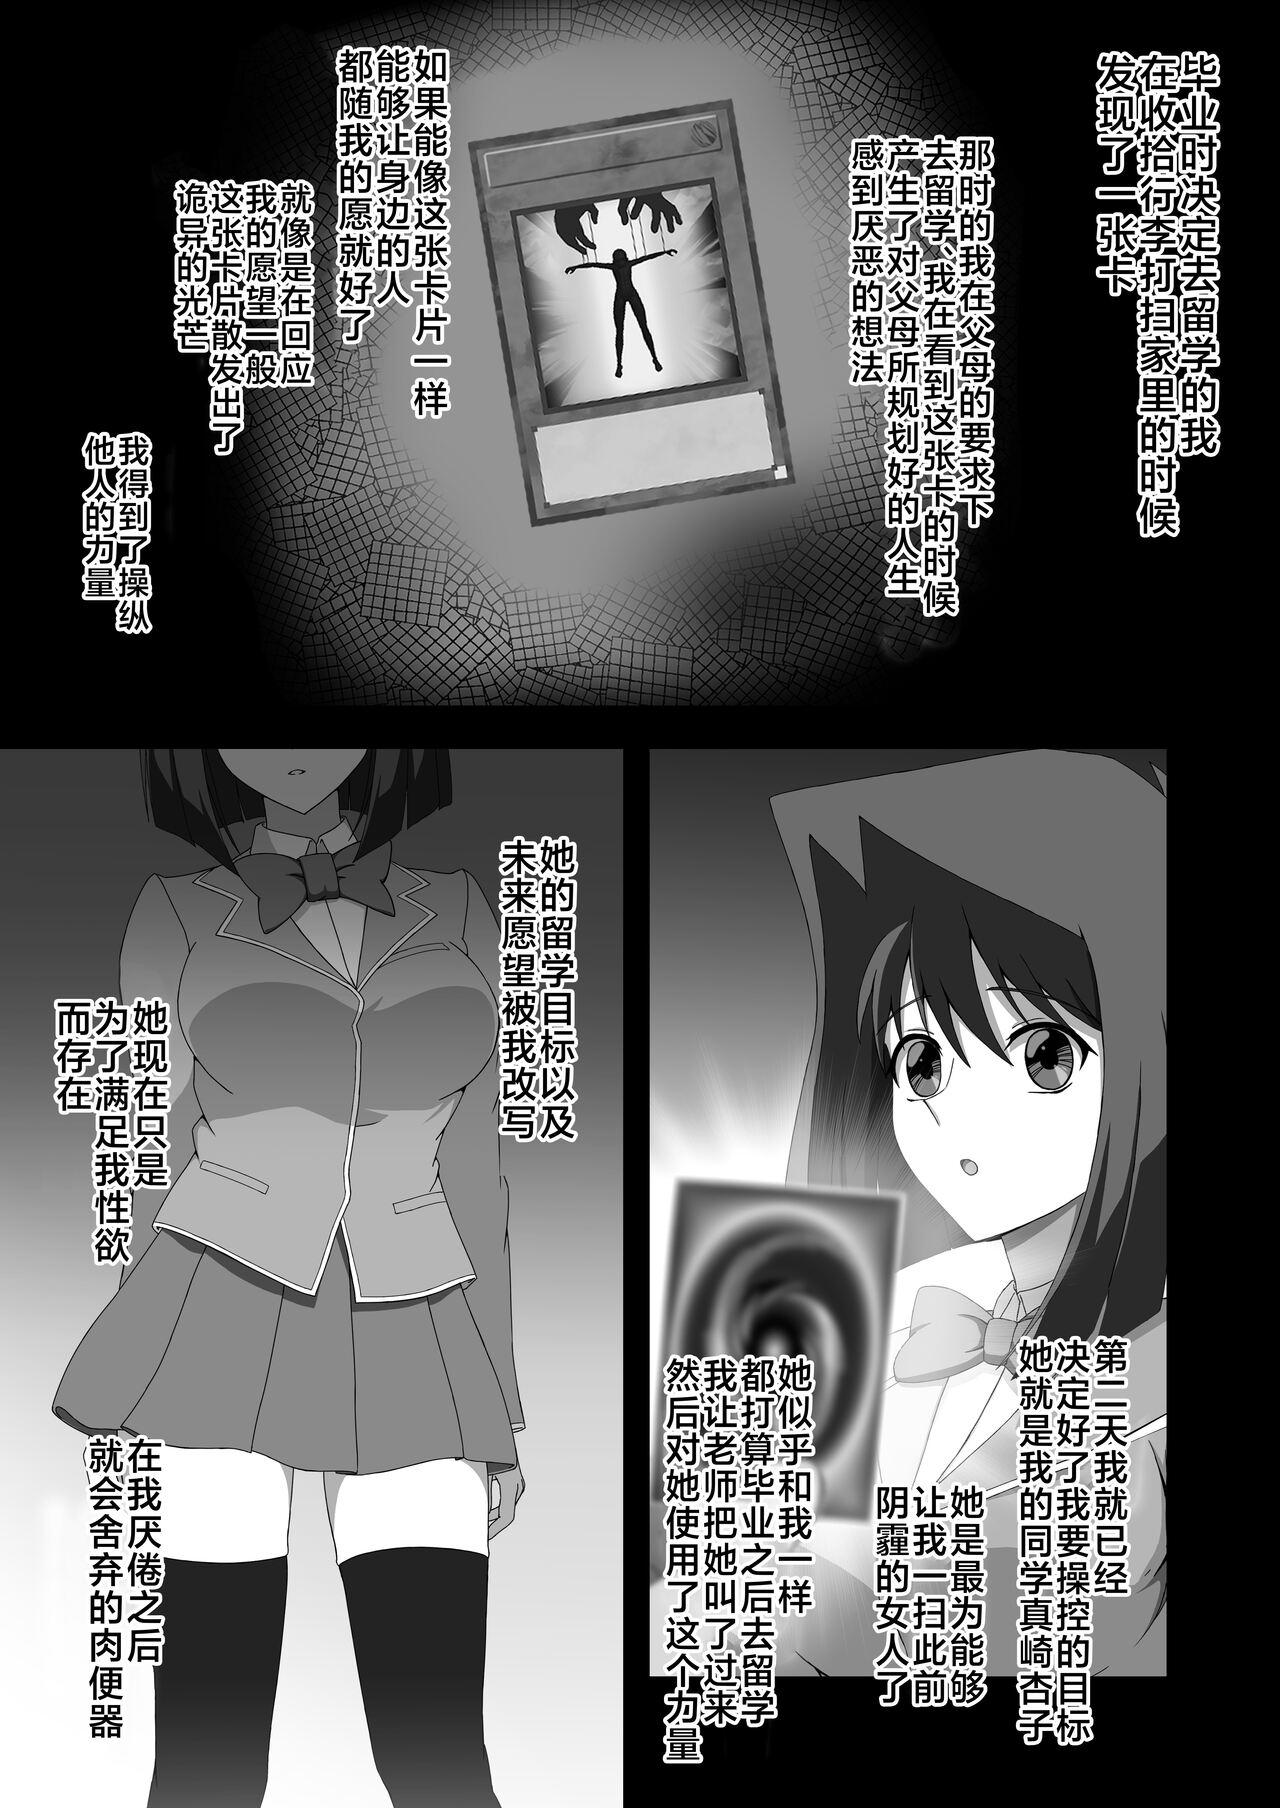 Girls Getting Fucked Take control of the target - Yu-gi-oh Bathroom - Page 6